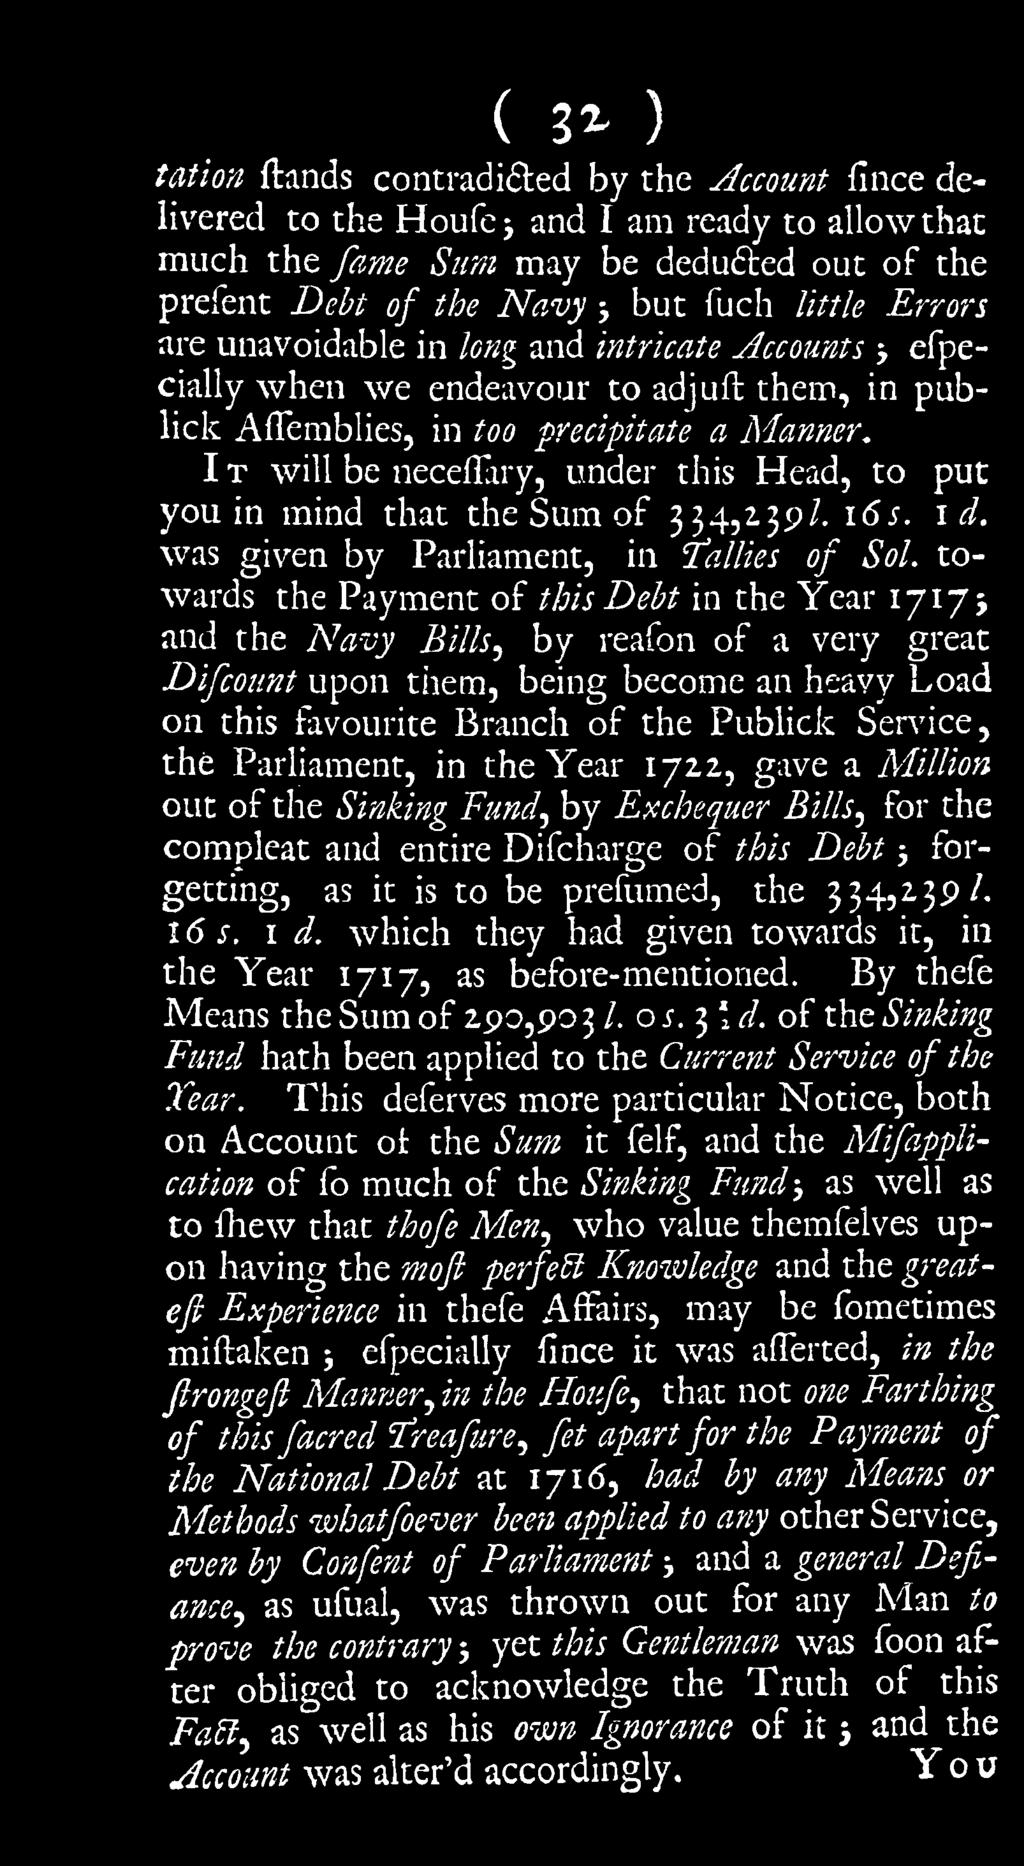 Parliament, in the Year 1722, gave a Million out of the Sinking Fund, by Exchequer Bills, for the compleat and entire Difcharge of this Debt ; forgetting, as it is to be prefumed, the 334,2,39/. 16s.